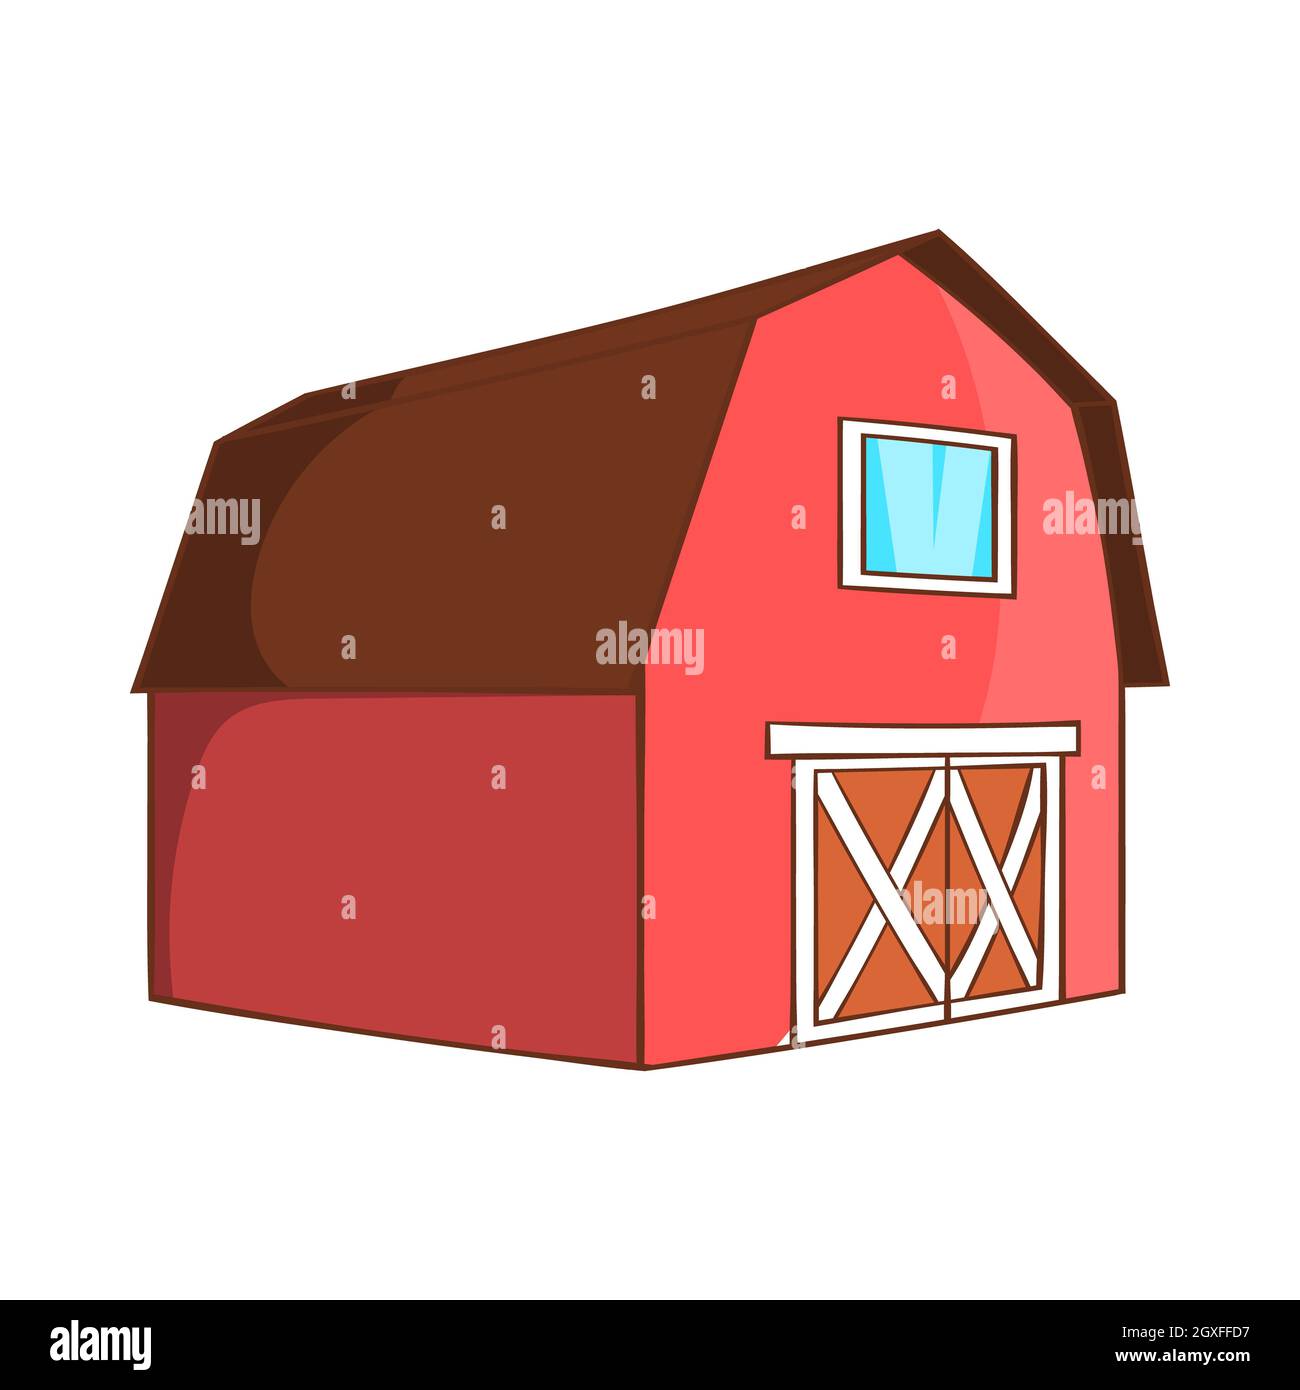 Barn for animals icon in cartoon style isolated on white background. Buildings for animals symbol Stock Photo